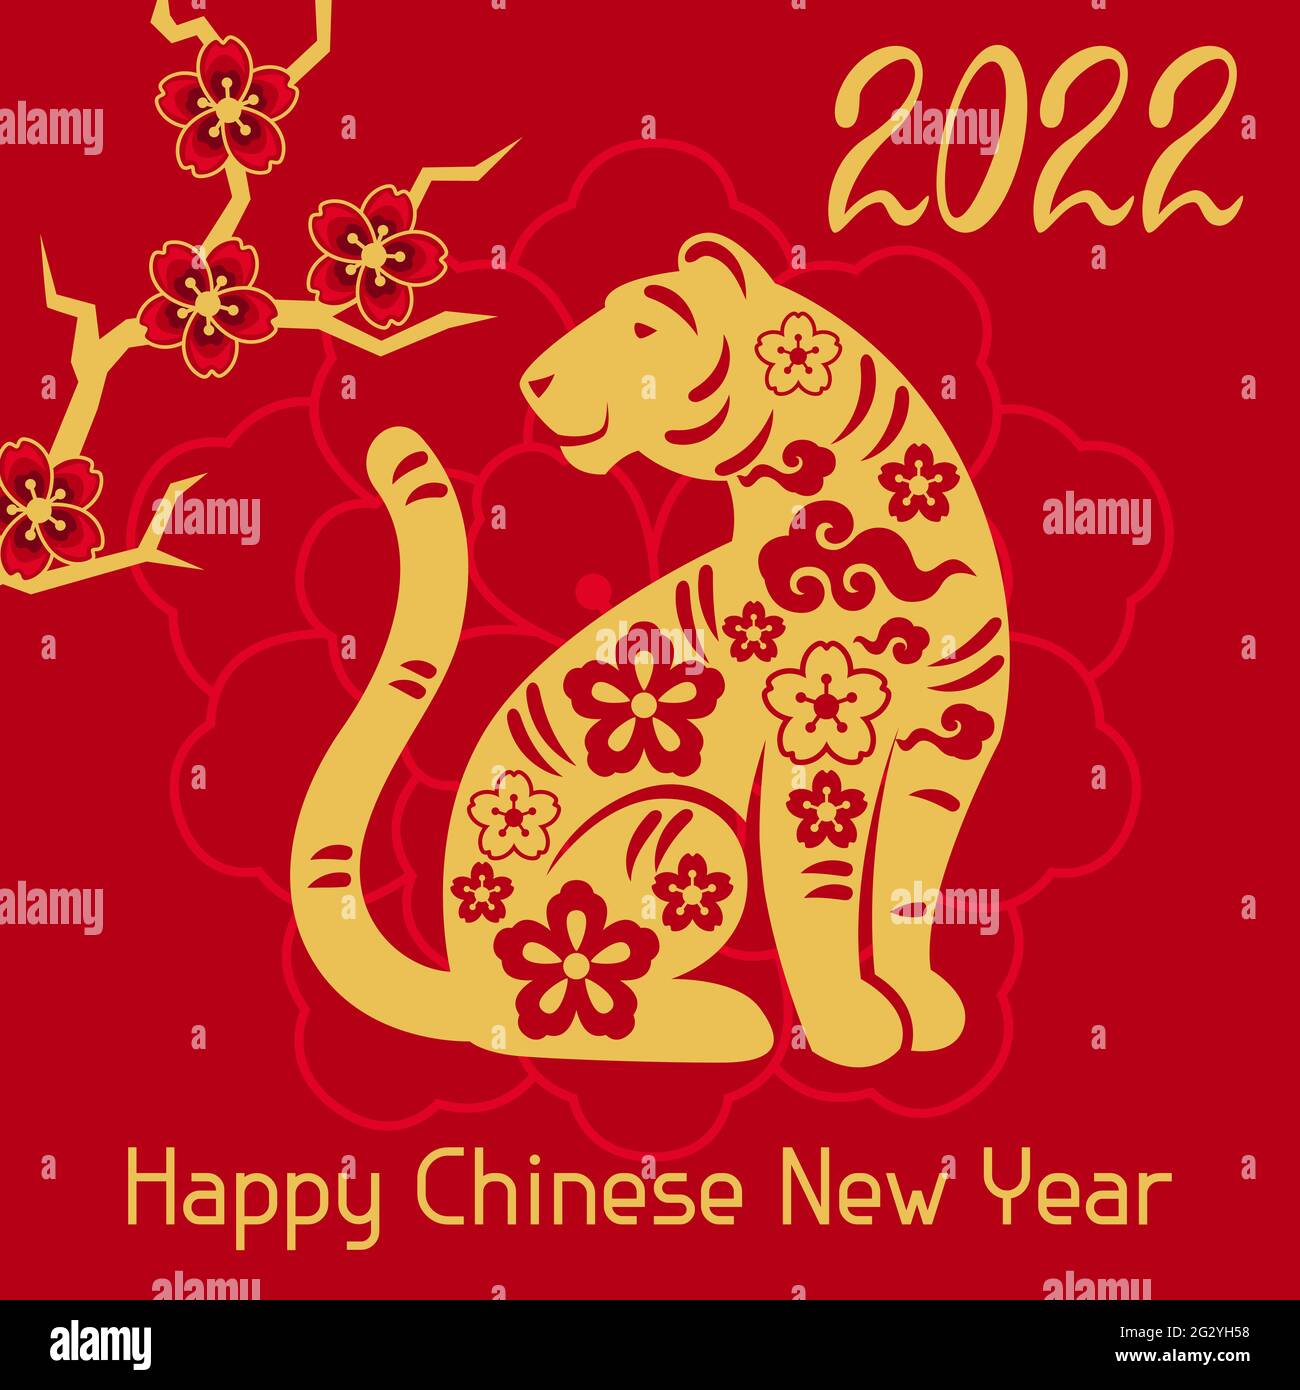 Wishes You Happy Chinese New Year 2022 Greeting Cards